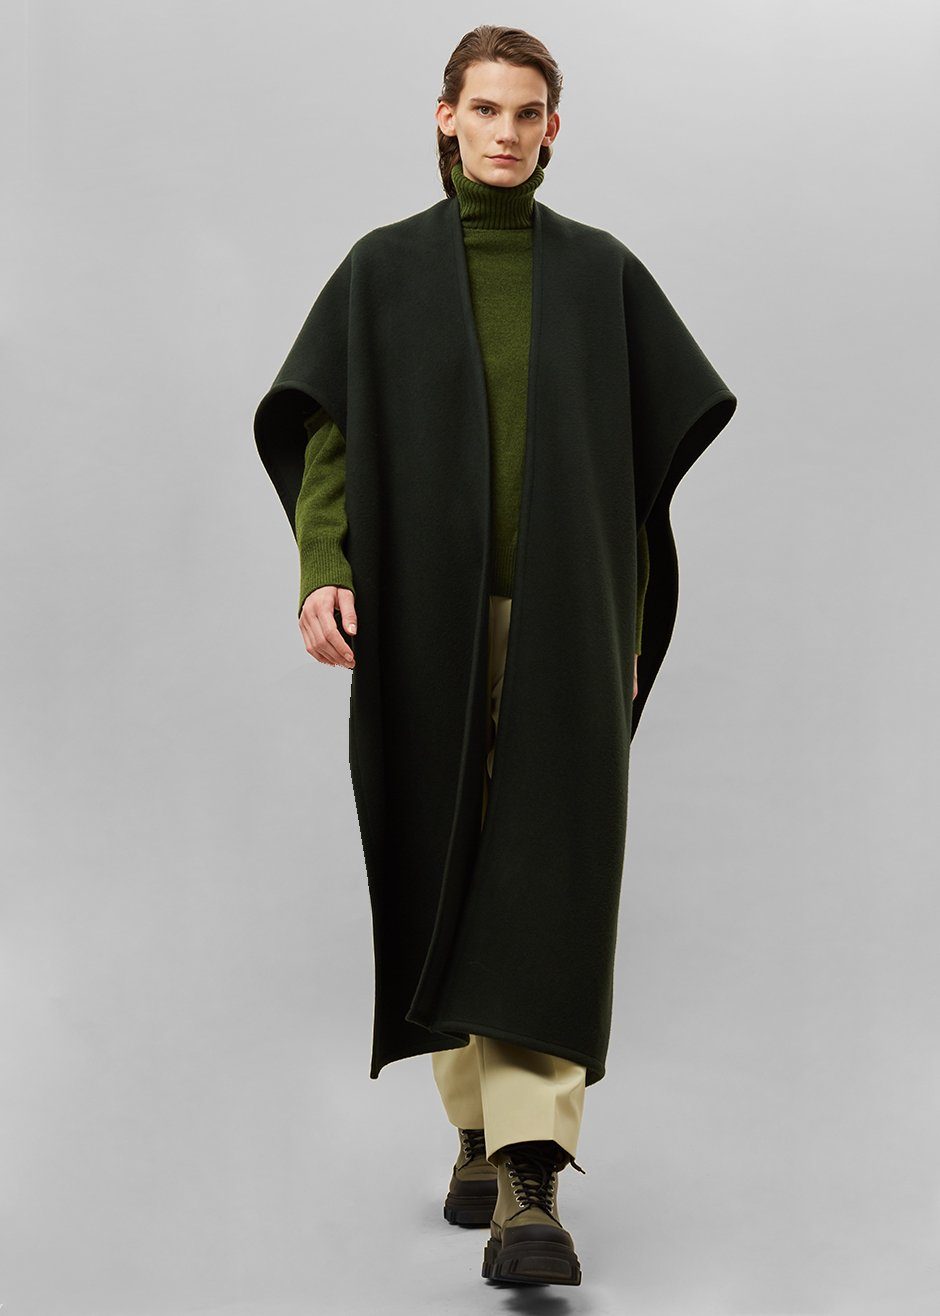 Verina Cape - Forest Green - 3